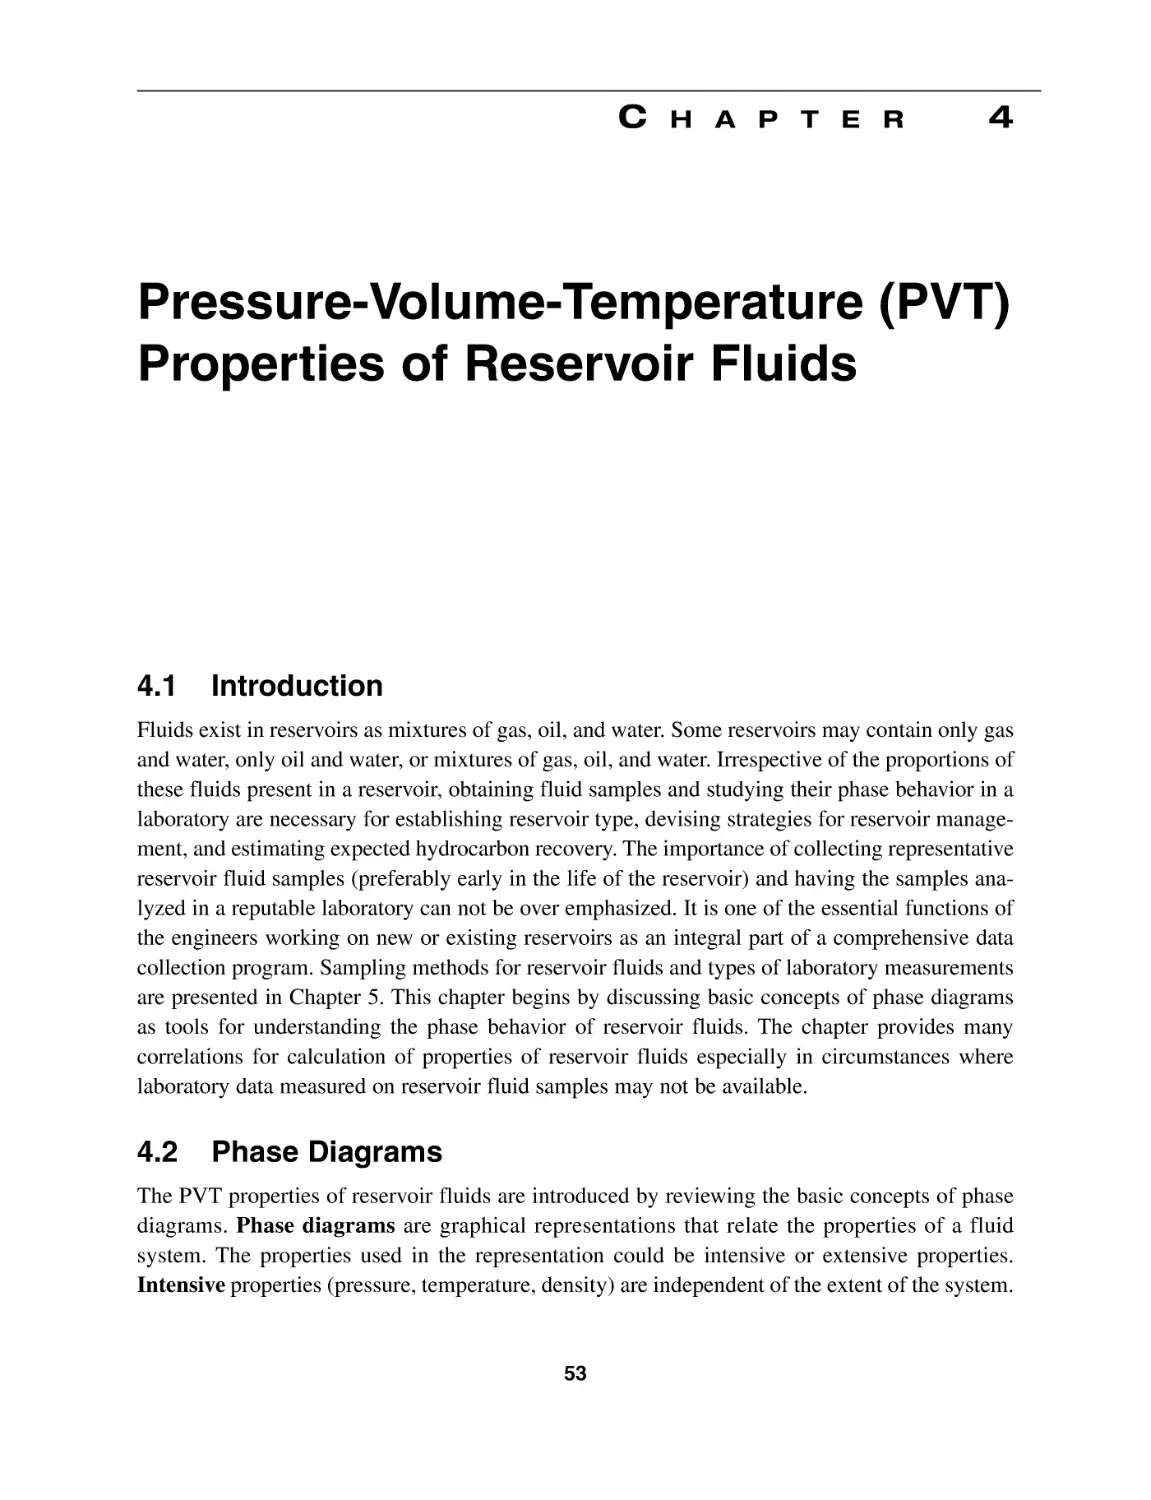 Chapter 4 Pressure-Volume-Temperature (PVT) Properties of Reservoir Fluids
4.1 Introduction
4.2 Phase Diagrams